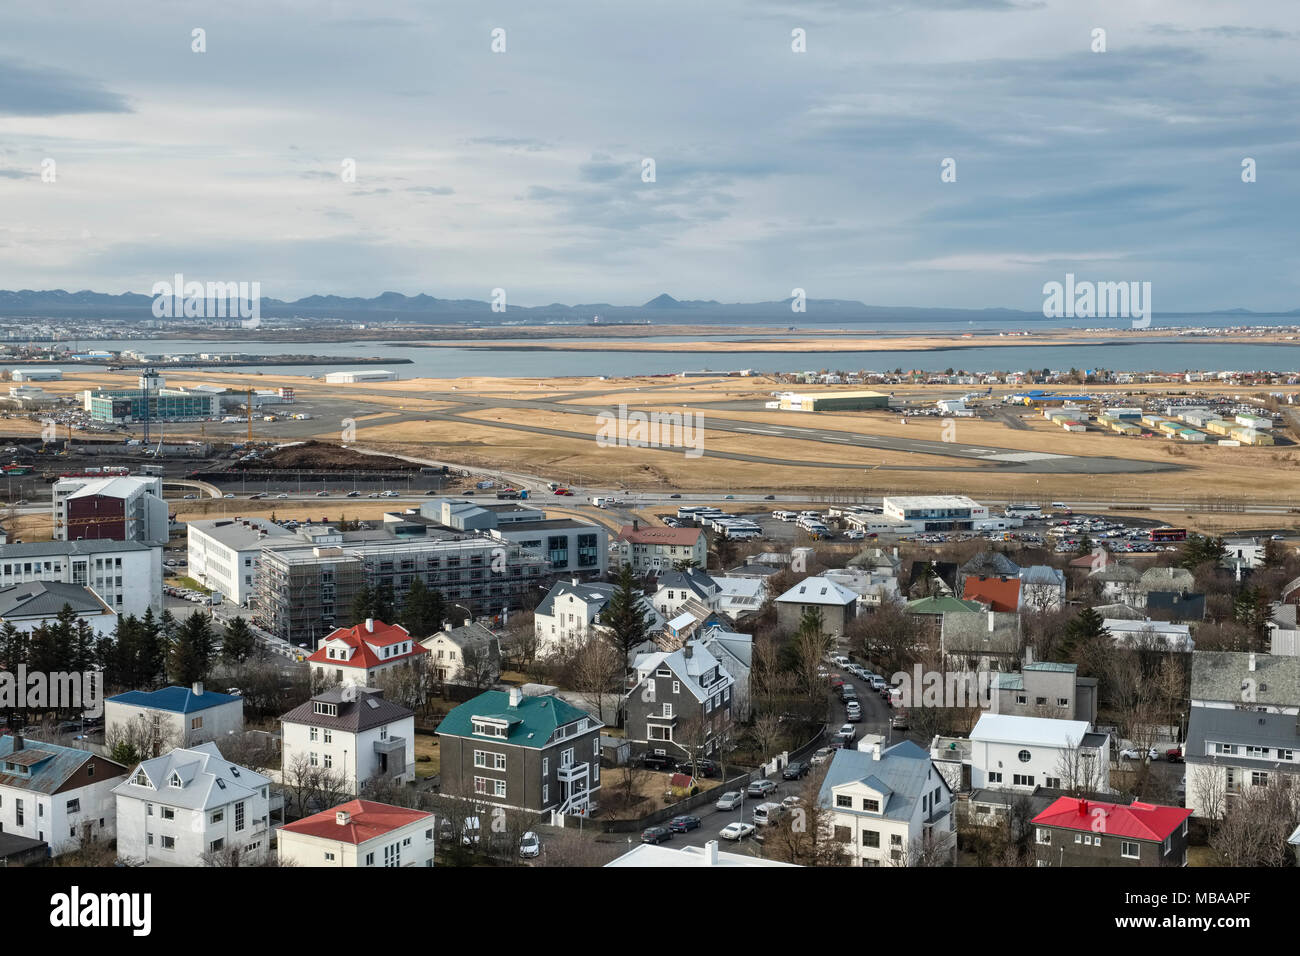 Reykjavik, Iceland. The view from the tower of Hallgrimskirkja church over Reykjavik Airport (RKV), the domestic airport for the city Stock Photo